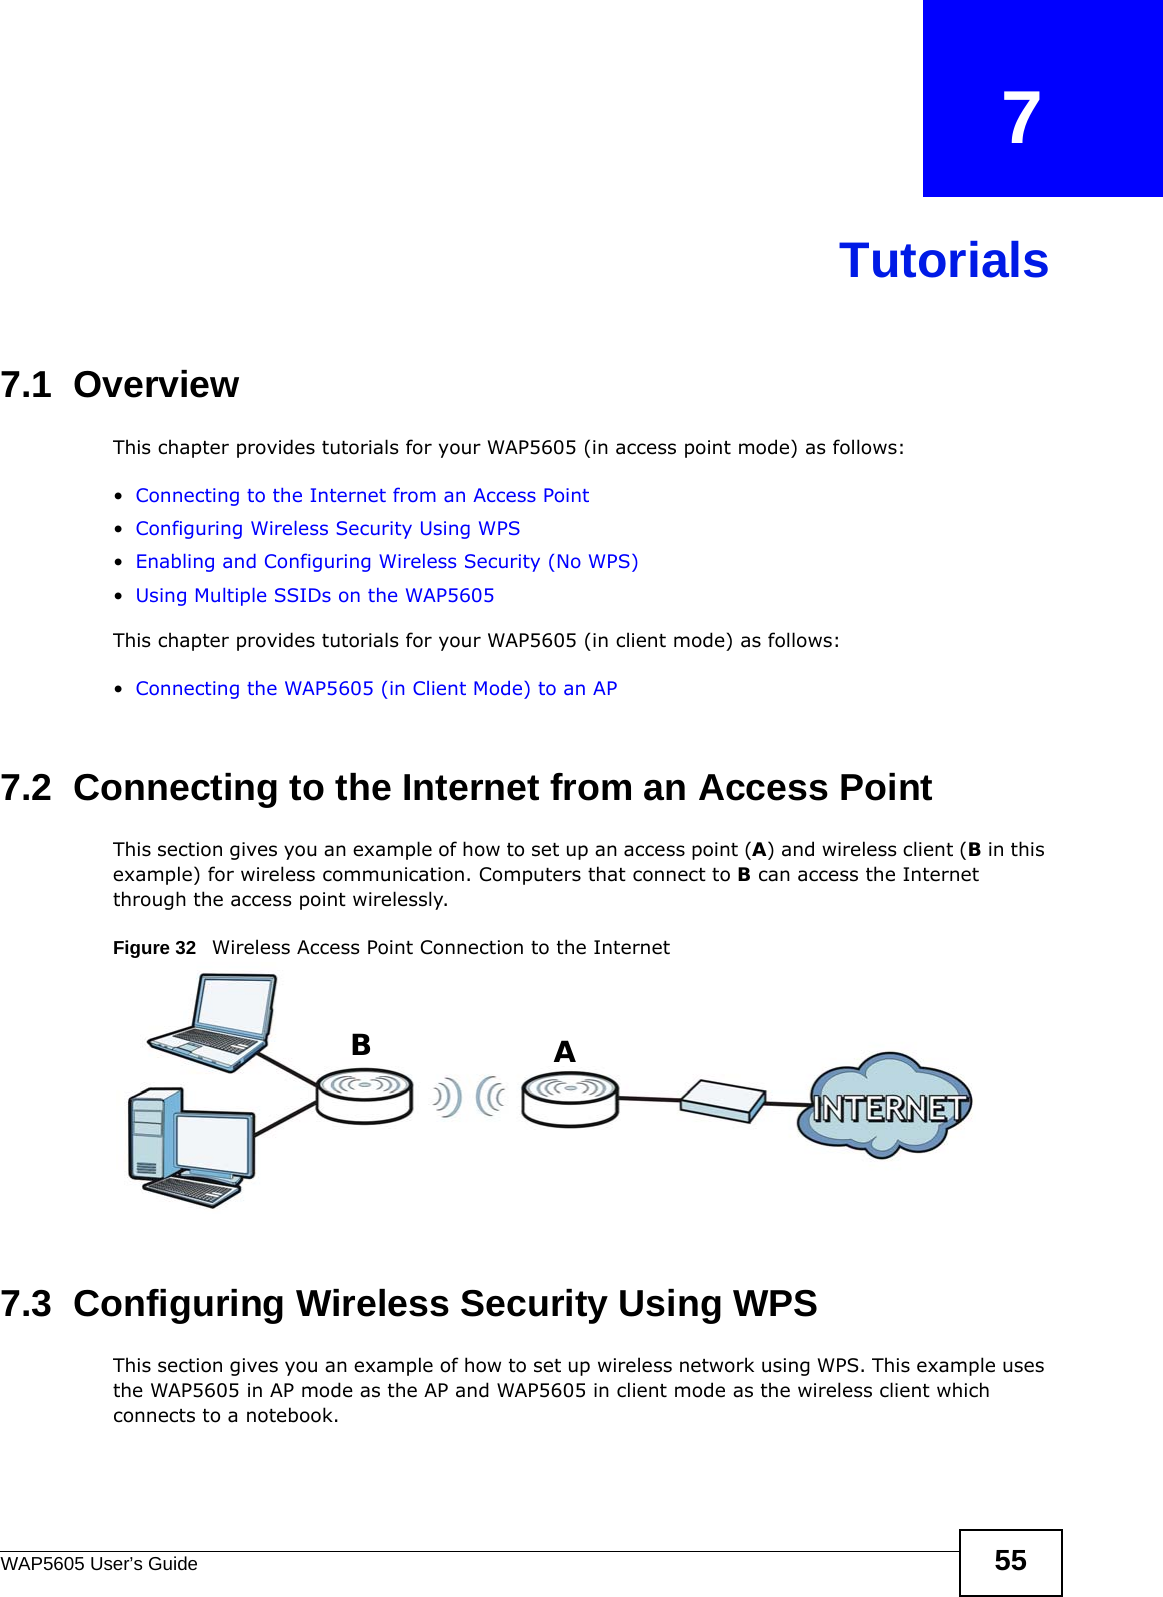 WAP5605 User’s Guide 55CHAPTER   7Tutorials7.1  OverviewThis chapter provides tutorials for your WAP5605 (in access point mode) as follows:•Connecting to the Internet from an Access Point•Configuring Wireless Security Using WPS•Enabling and Configuring Wireless Security (No WPS)•Using Multiple SSIDs on the WAP5605This chapter provides tutorials for your WAP5605 (in client mode) as follows:•Connecting the WAP5605 (in Client Mode) to an AP7.2  Connecting to the Internet from an Access PointThis section gives you an example of how to set up an access point (A) and wireless client (B in this example) for wireless communication. Computers that connect to B can access the Internet through the access point wirelessly.Figure 32   Wireless Access Point Connection to the Internet7.3  Configuring Wireless Security Using WPSThis section gives you an example of how to set up wireless network using WPS. This example uses the WAP5605 in AP mode as the AP and WAP5605 in client mode as the wireless client which connects to a notebook. AB